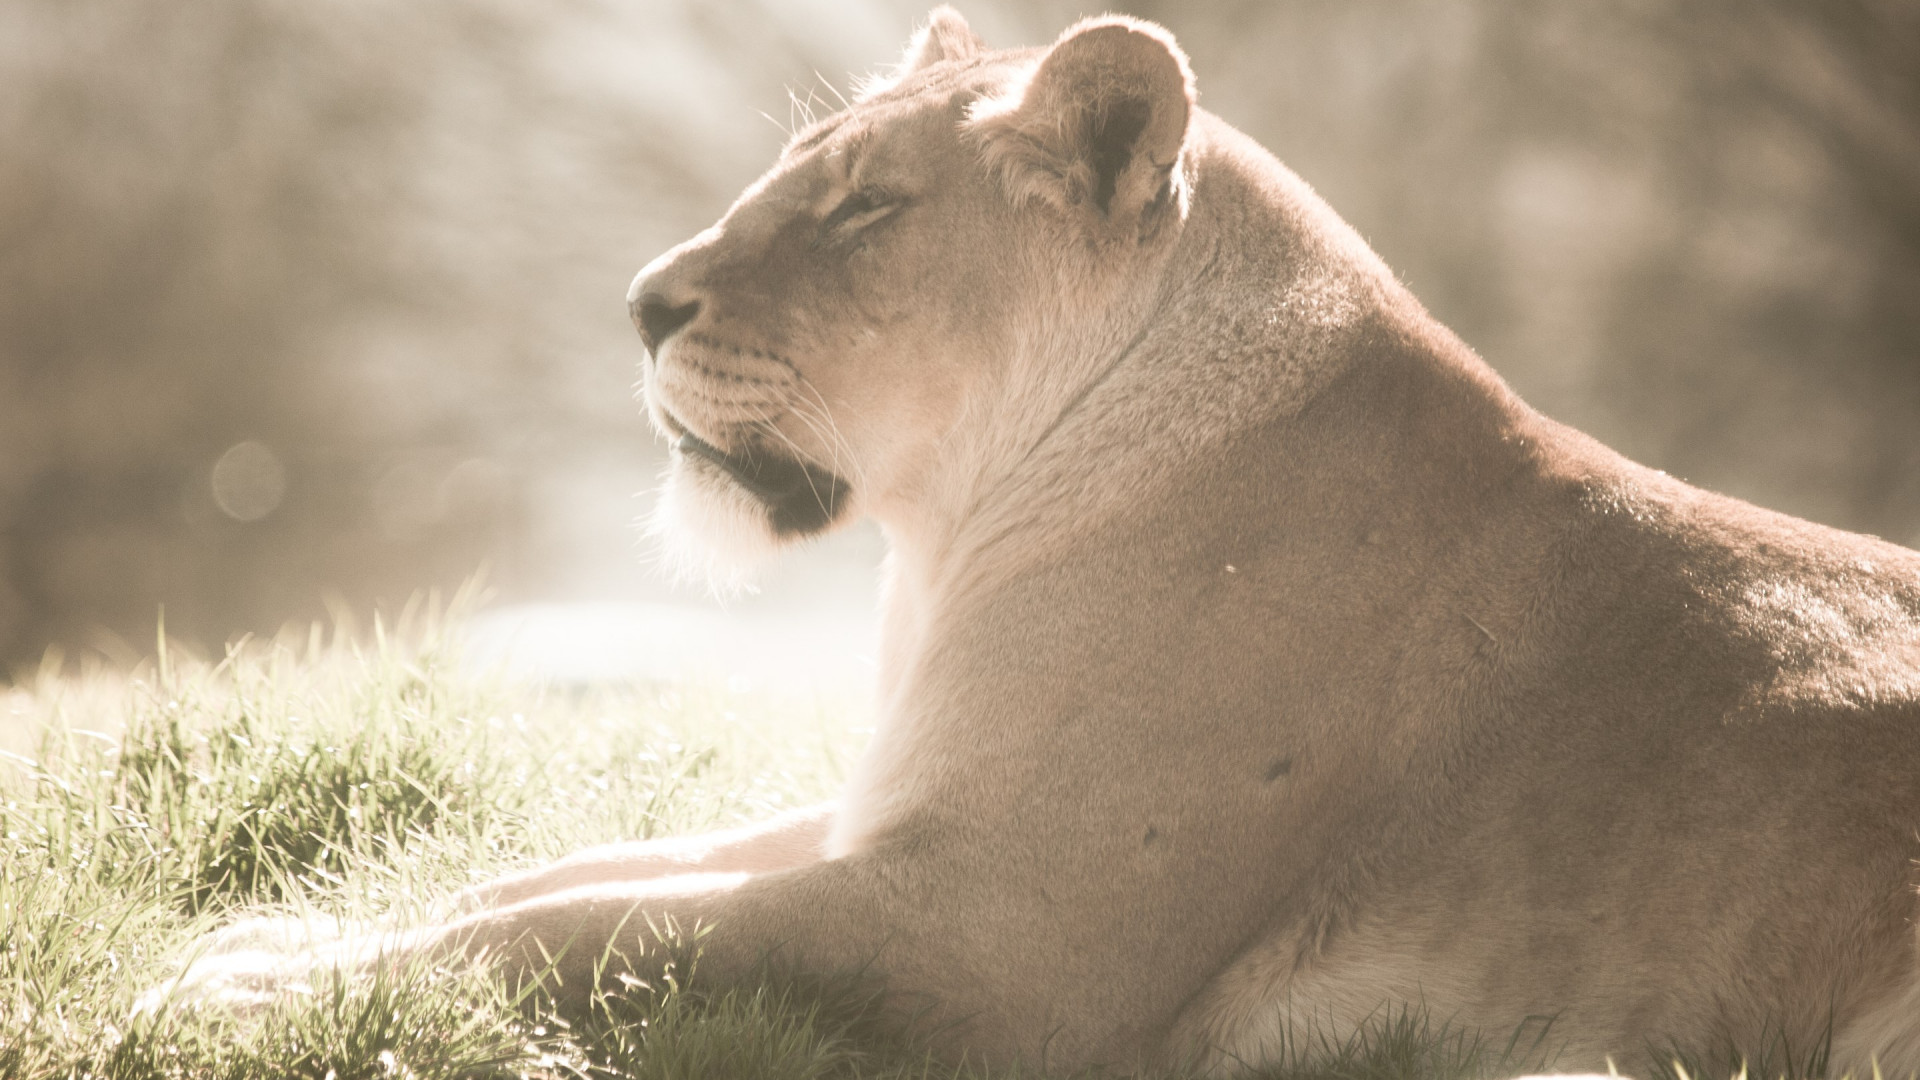 Lioness at Whipsnade Zoo wallpaper 1920x1080